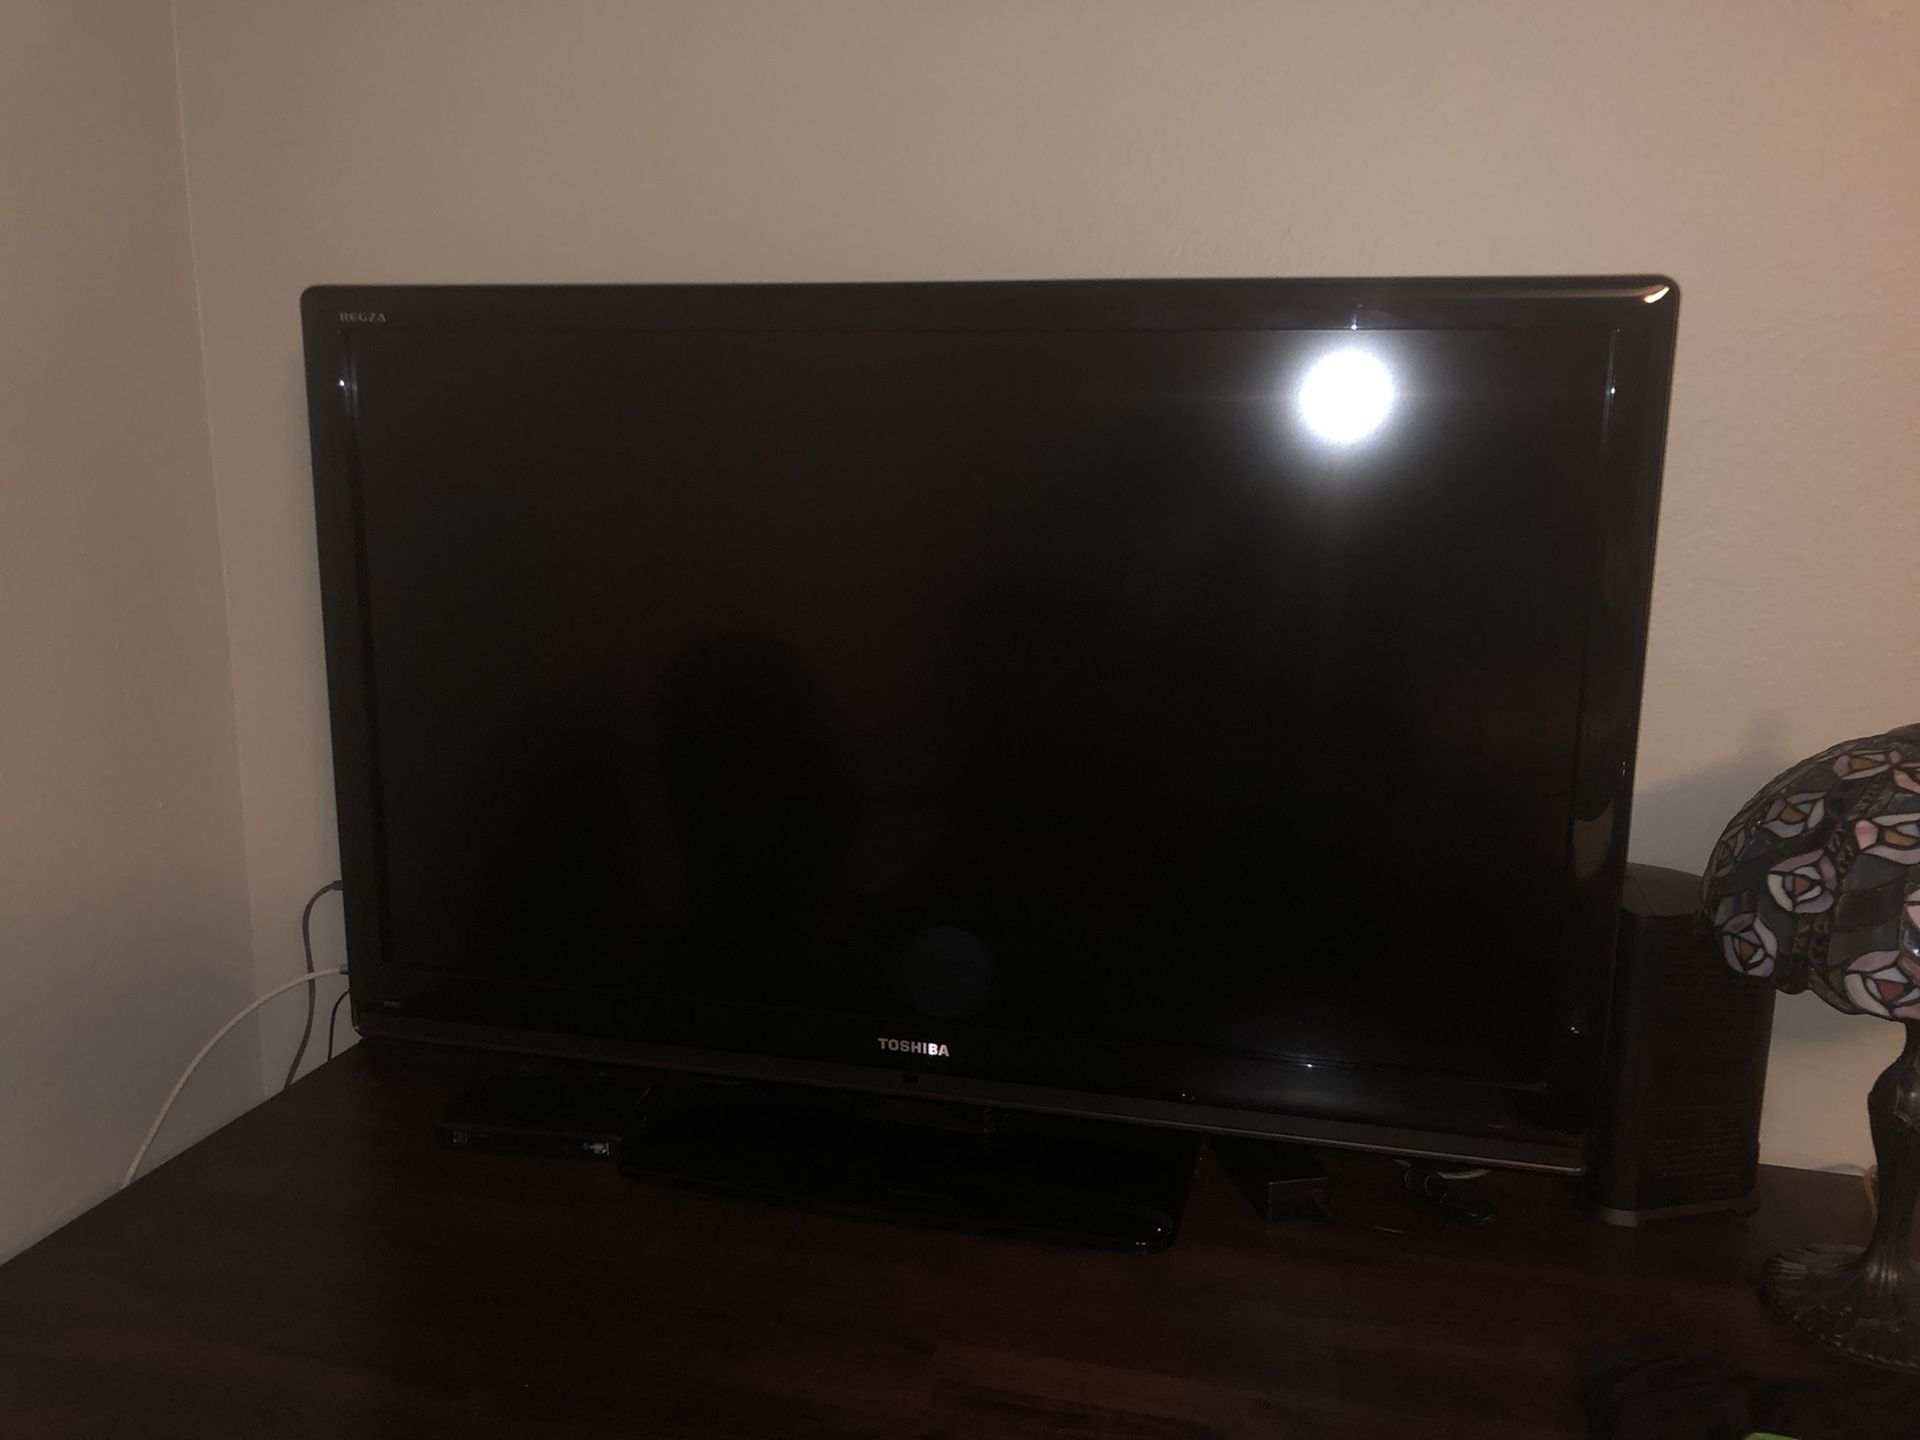 46” Toshiba LCD TV with remote